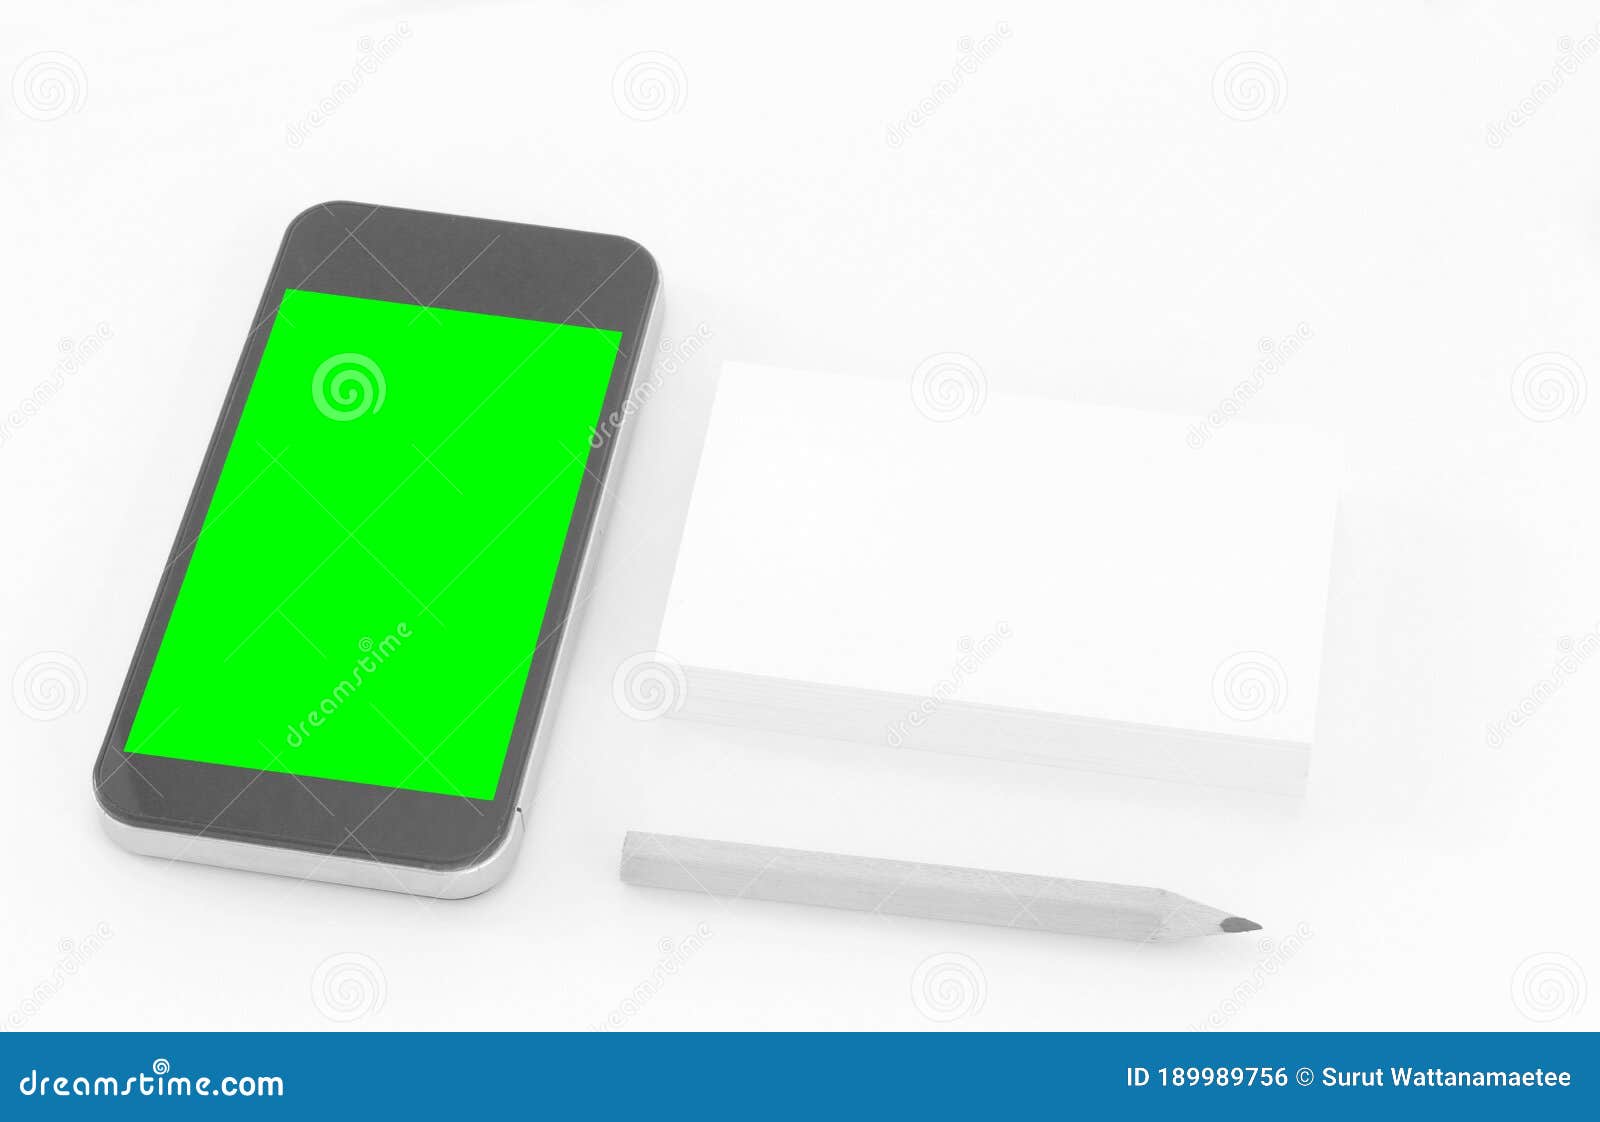 mockup of business cards with smart phone on white textured paper background